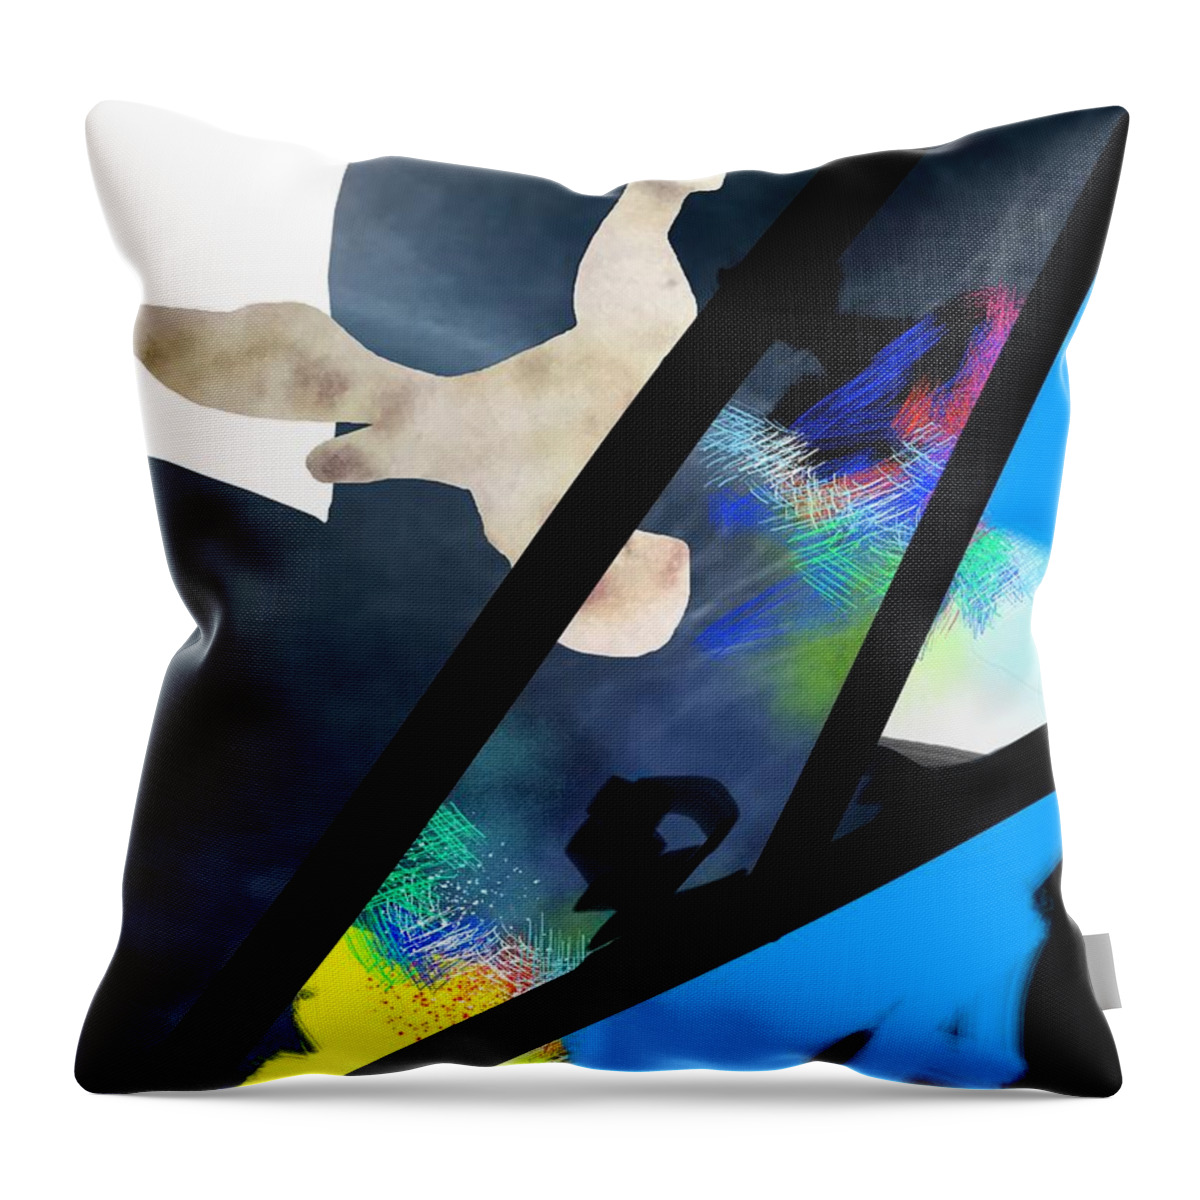 Art Throw Pillow featuring the digital art We Needed To Meet by Jeremiah Ray